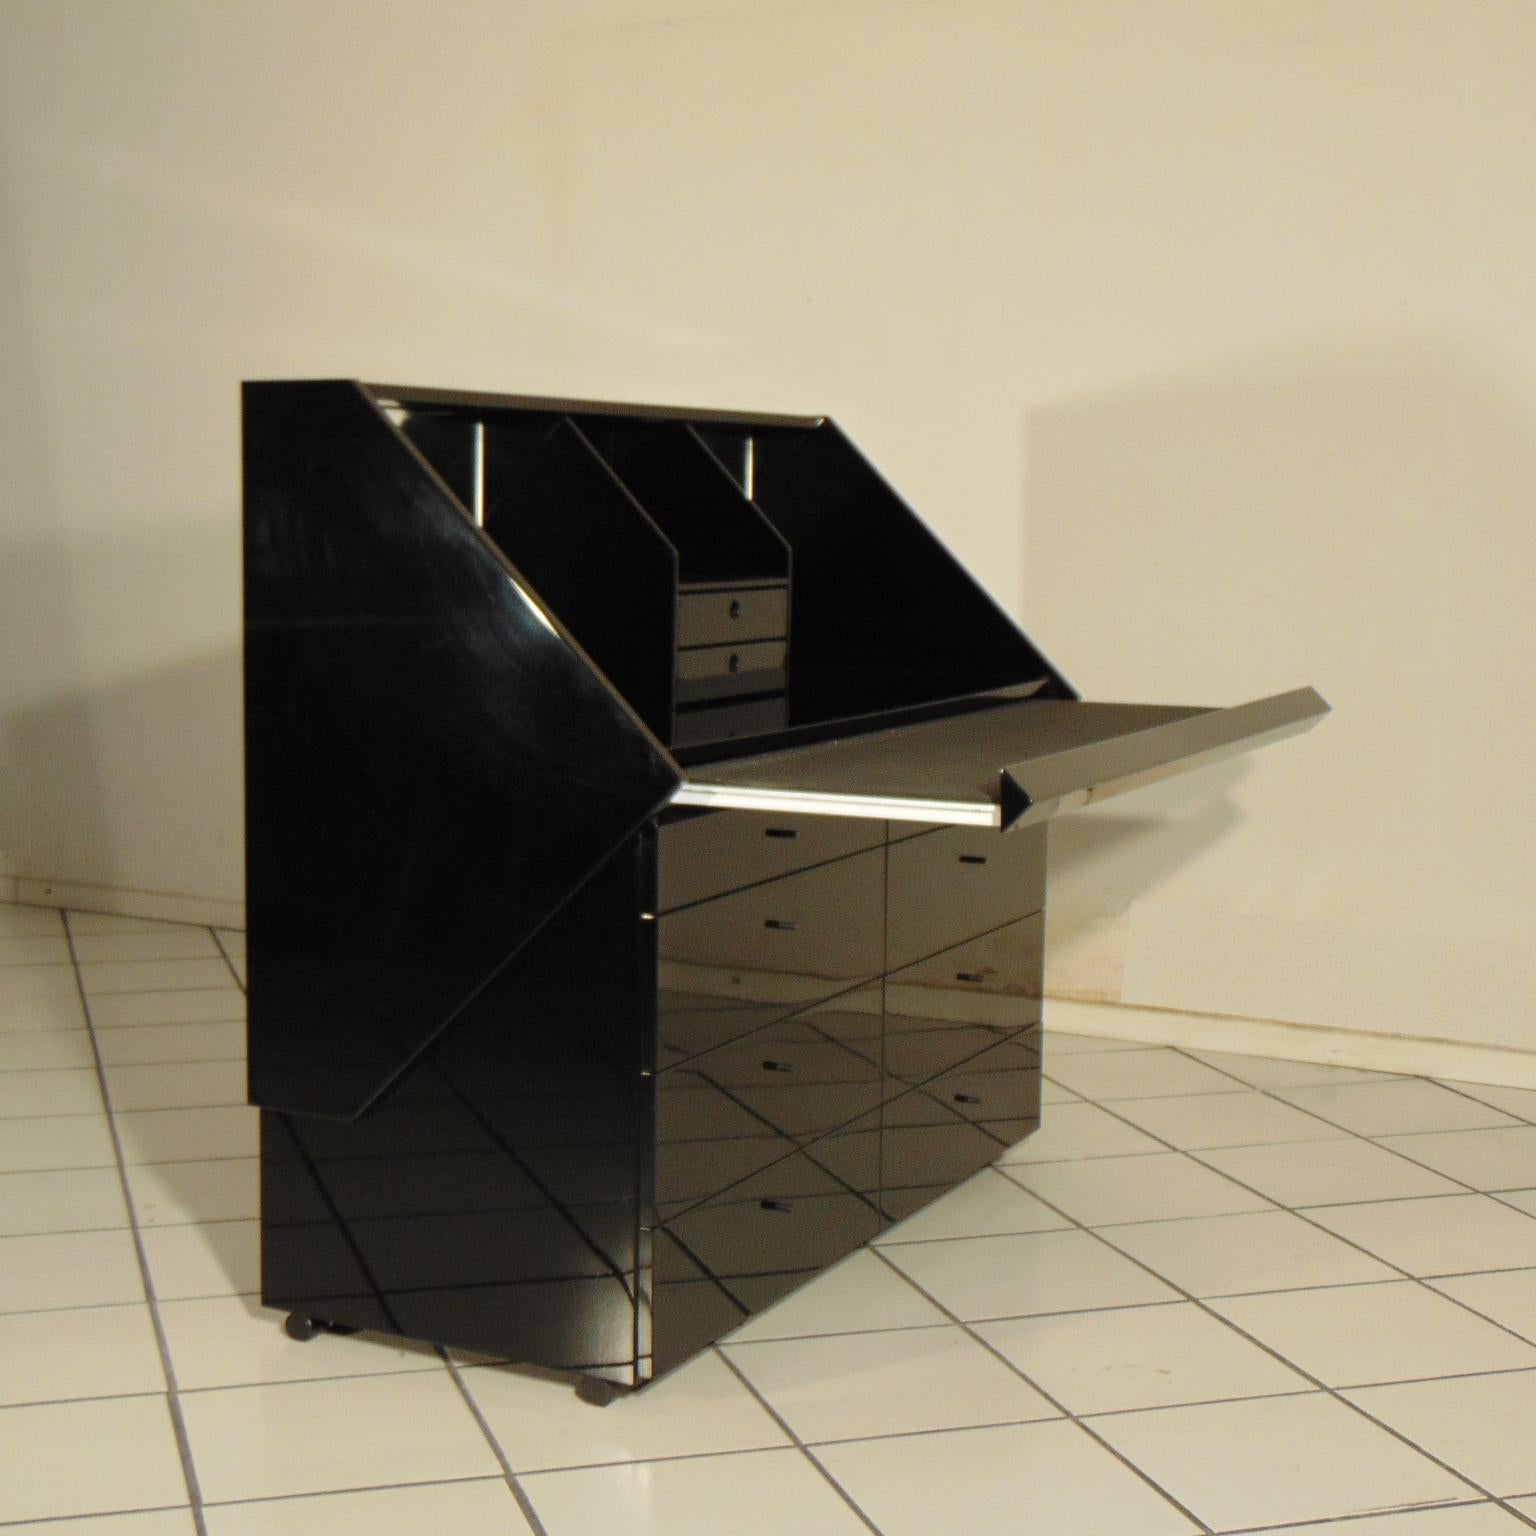 A multifunctional container, this elegant glossy black lacquered piece works:
- As a commode (with six spacious drawers, plus two thinner on the upper side);
- As writing desk, with a pull-out writing top;
- As secretaire with two smaller